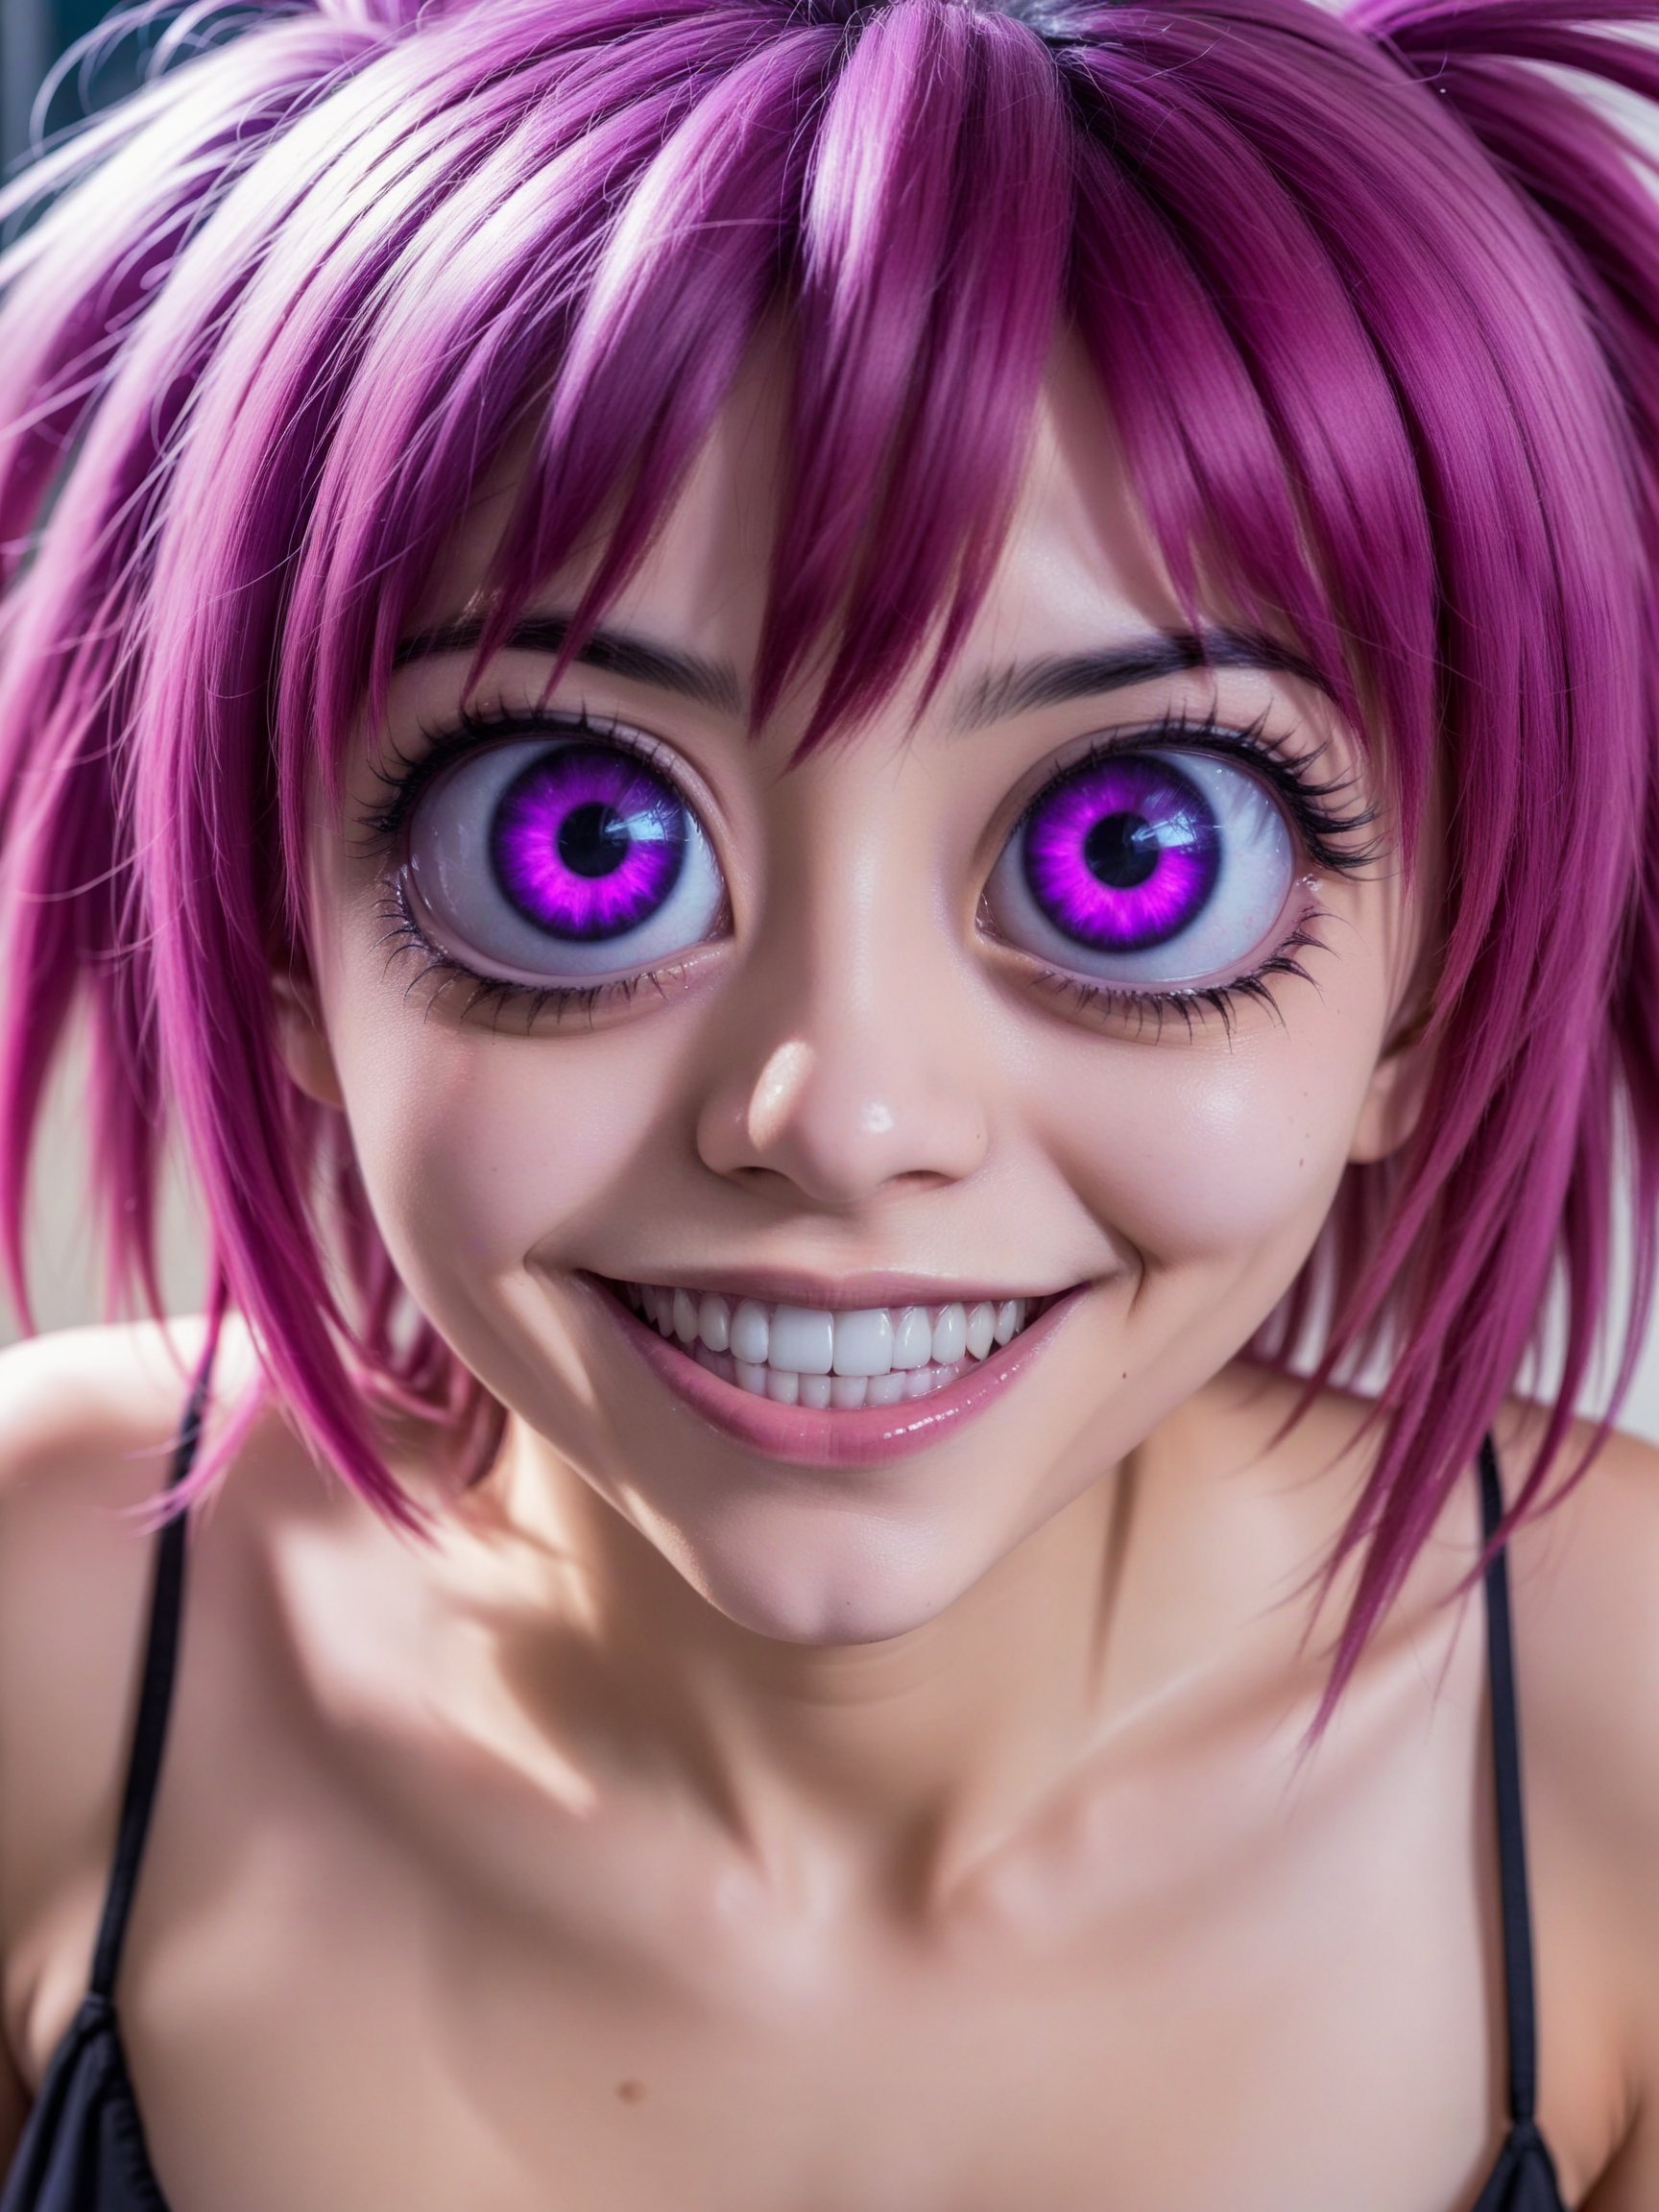 <lora:bigeyes-v2_16x8-4x1-000003:1>,a realistic photograph of woman with anime hair and huge purple anime eyesgrinning